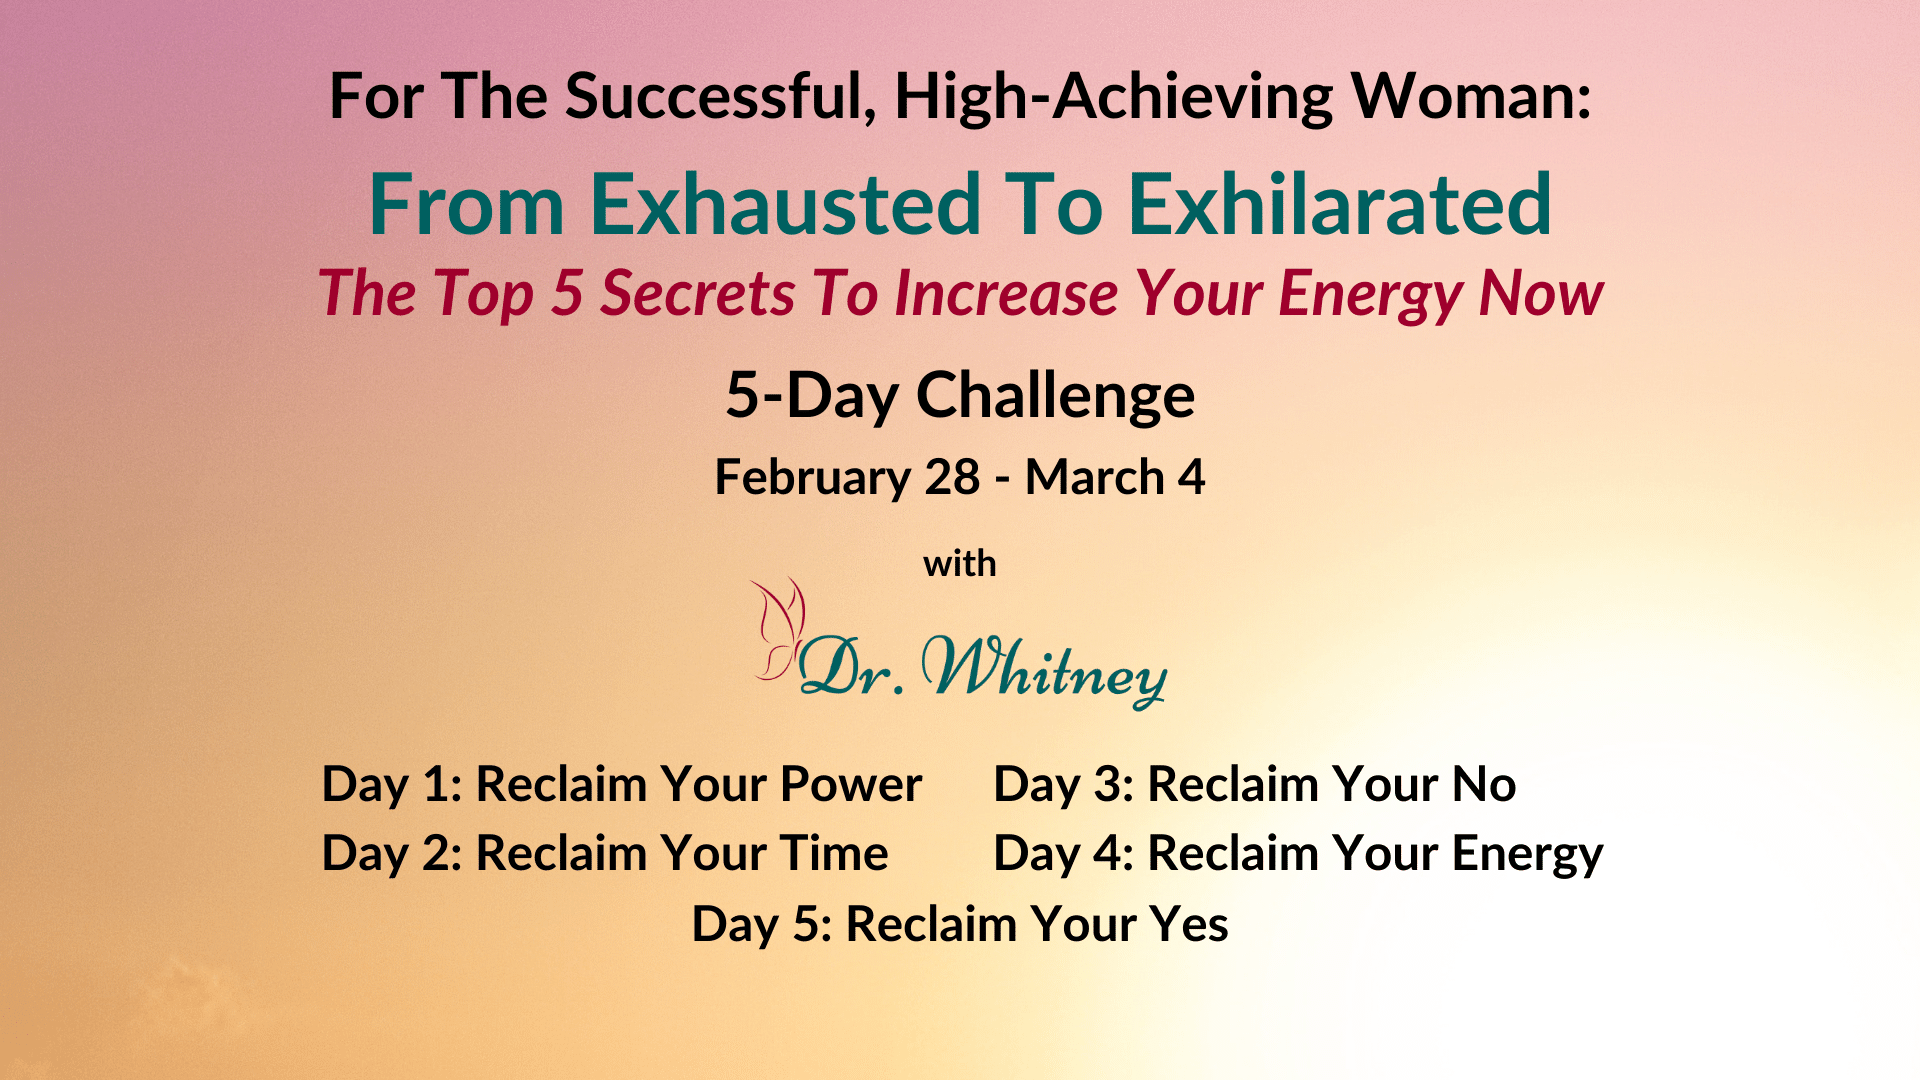 From Exhausted To Exhilarated Challenge